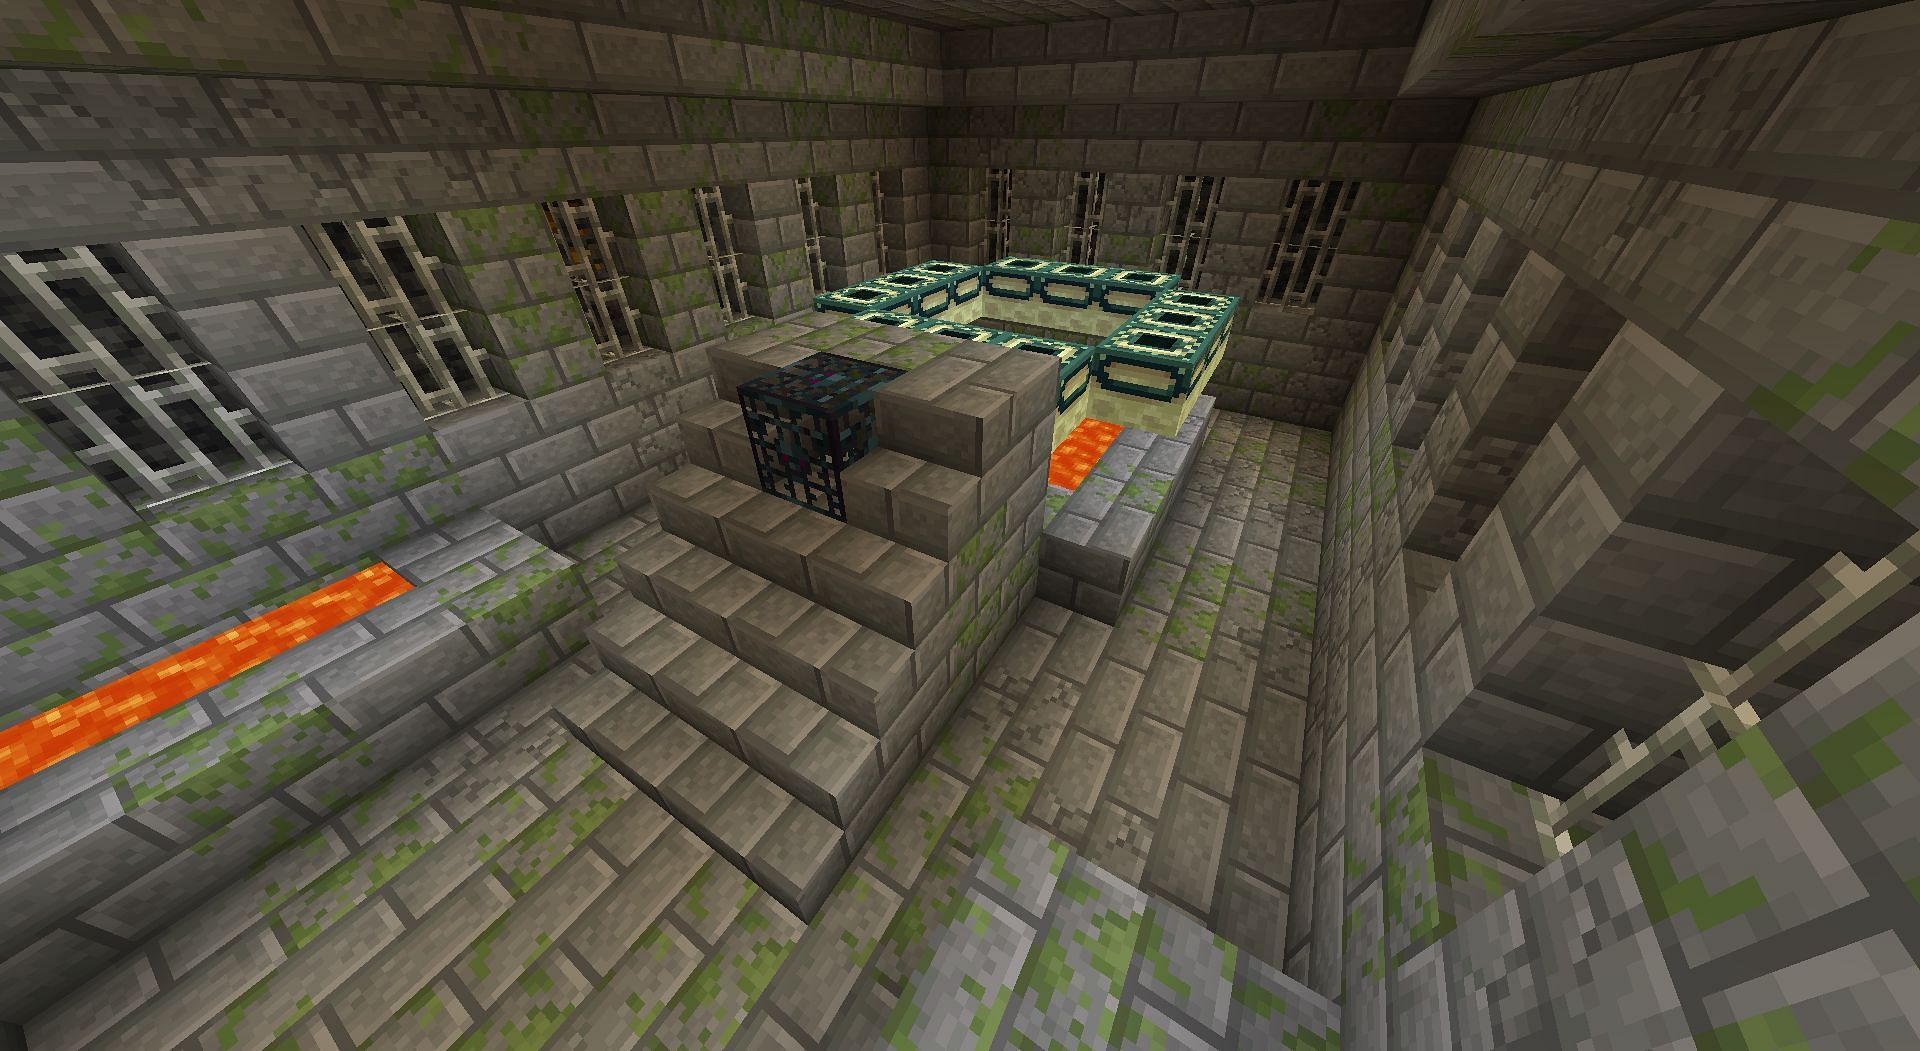 Finding the portal room can be tedious (Image via Minecraft)